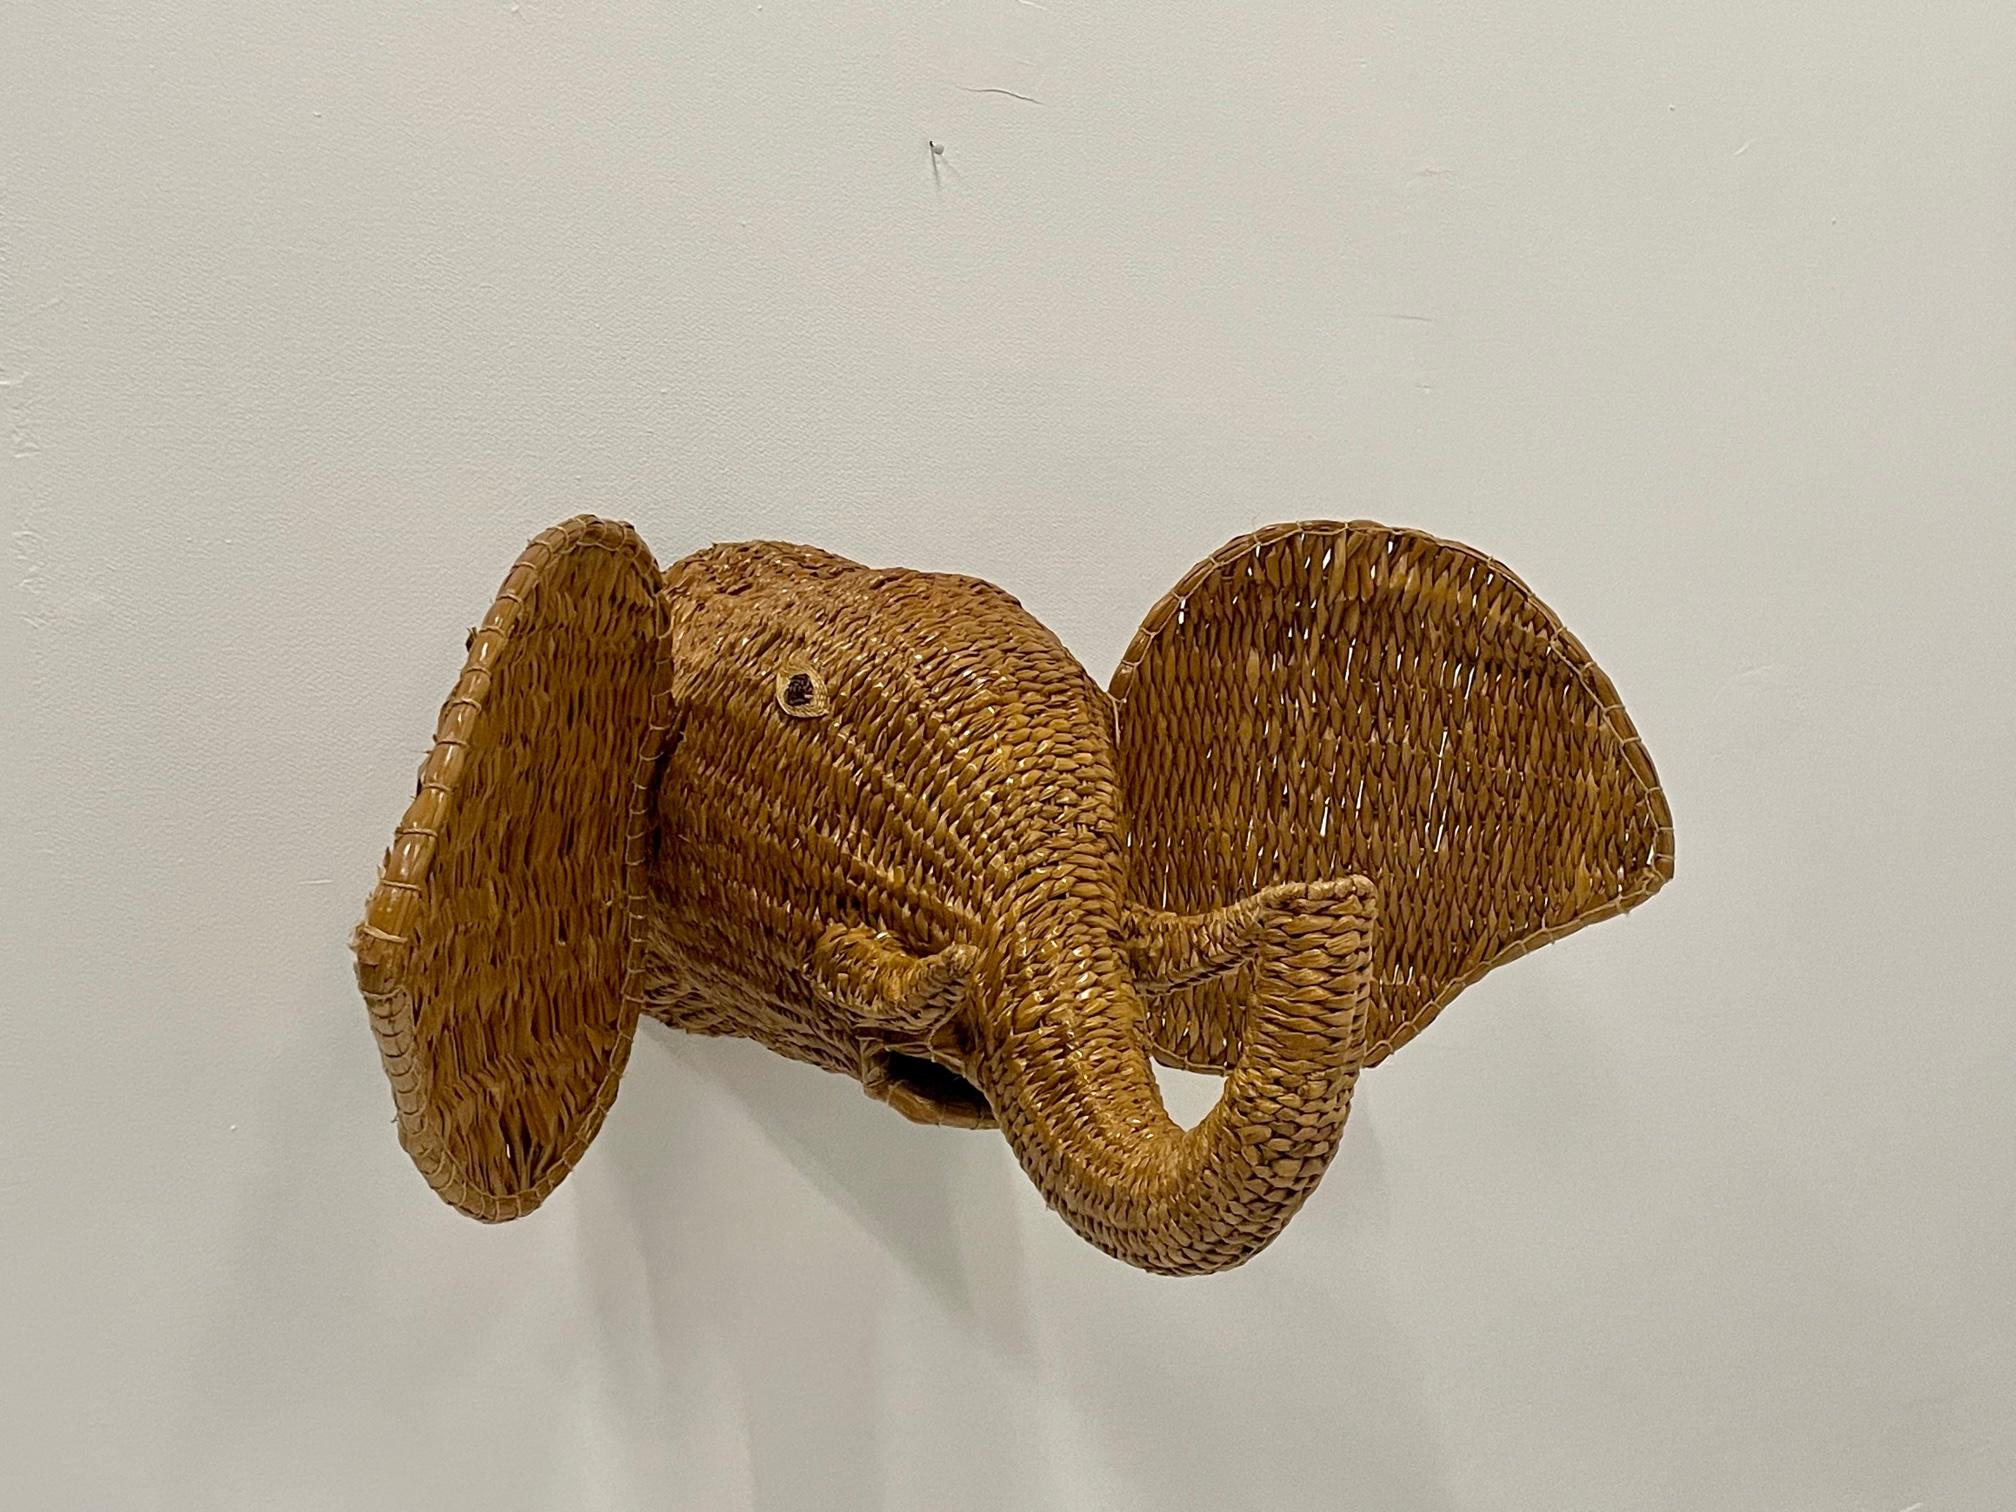 The show stealer wall decor work of art is a vintage water hyacinth elephant trophy head, whimsical and impressive in scale.